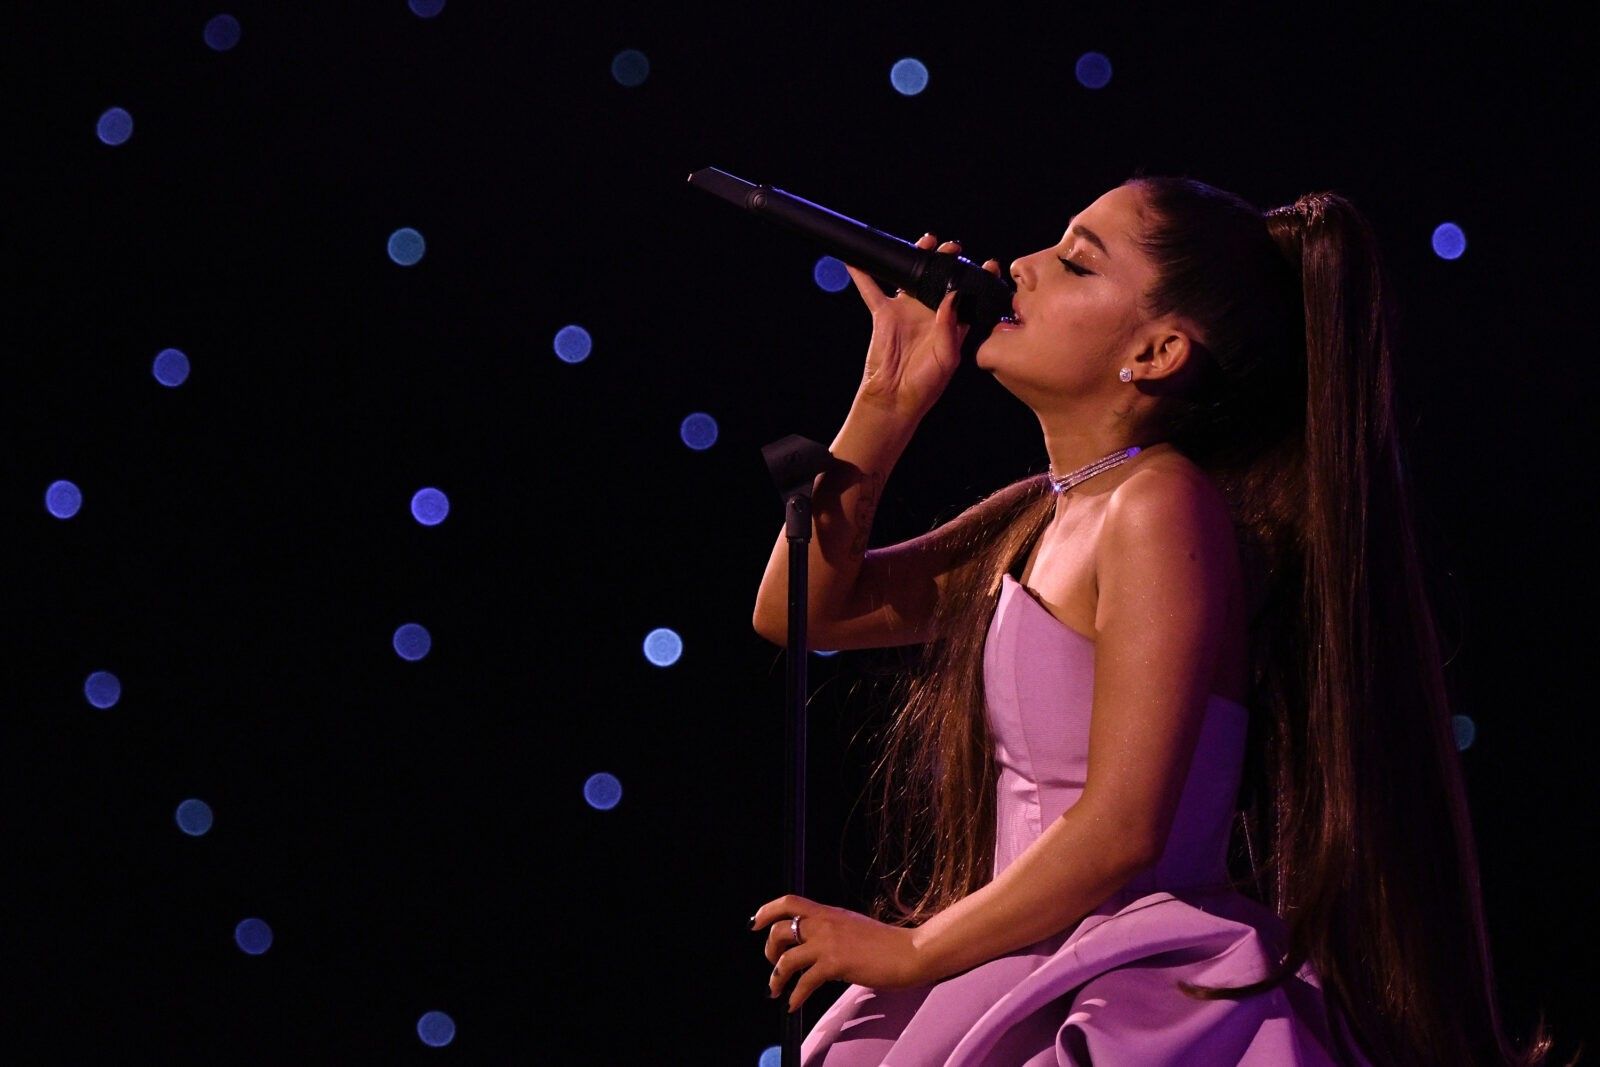 Ariana-Grande wearing a pink dress while performing on stage.